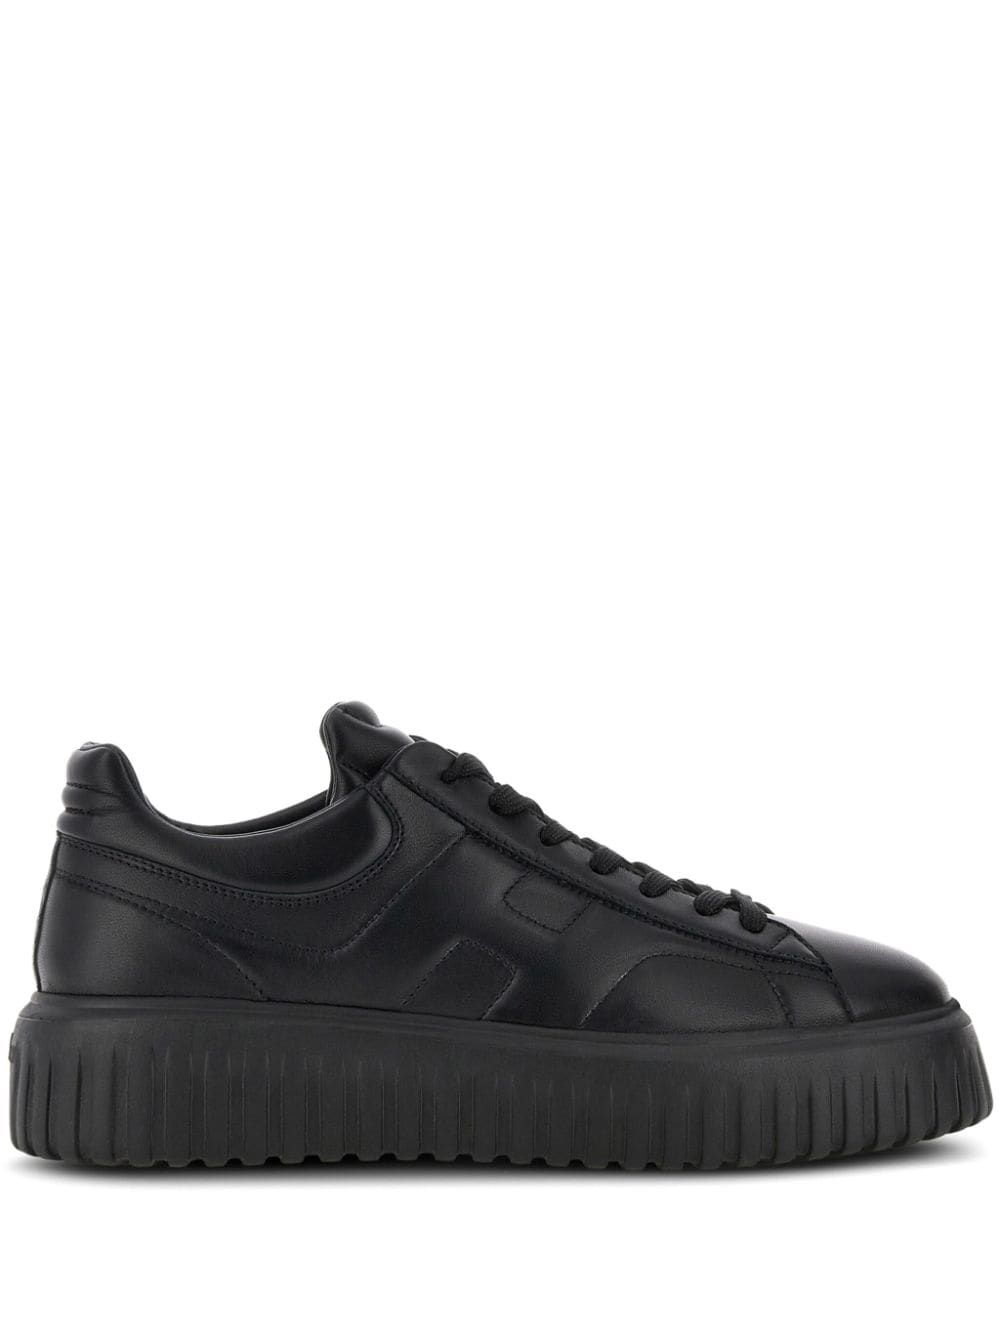 Image 1 of Hogan H-Stripes leather sneakers